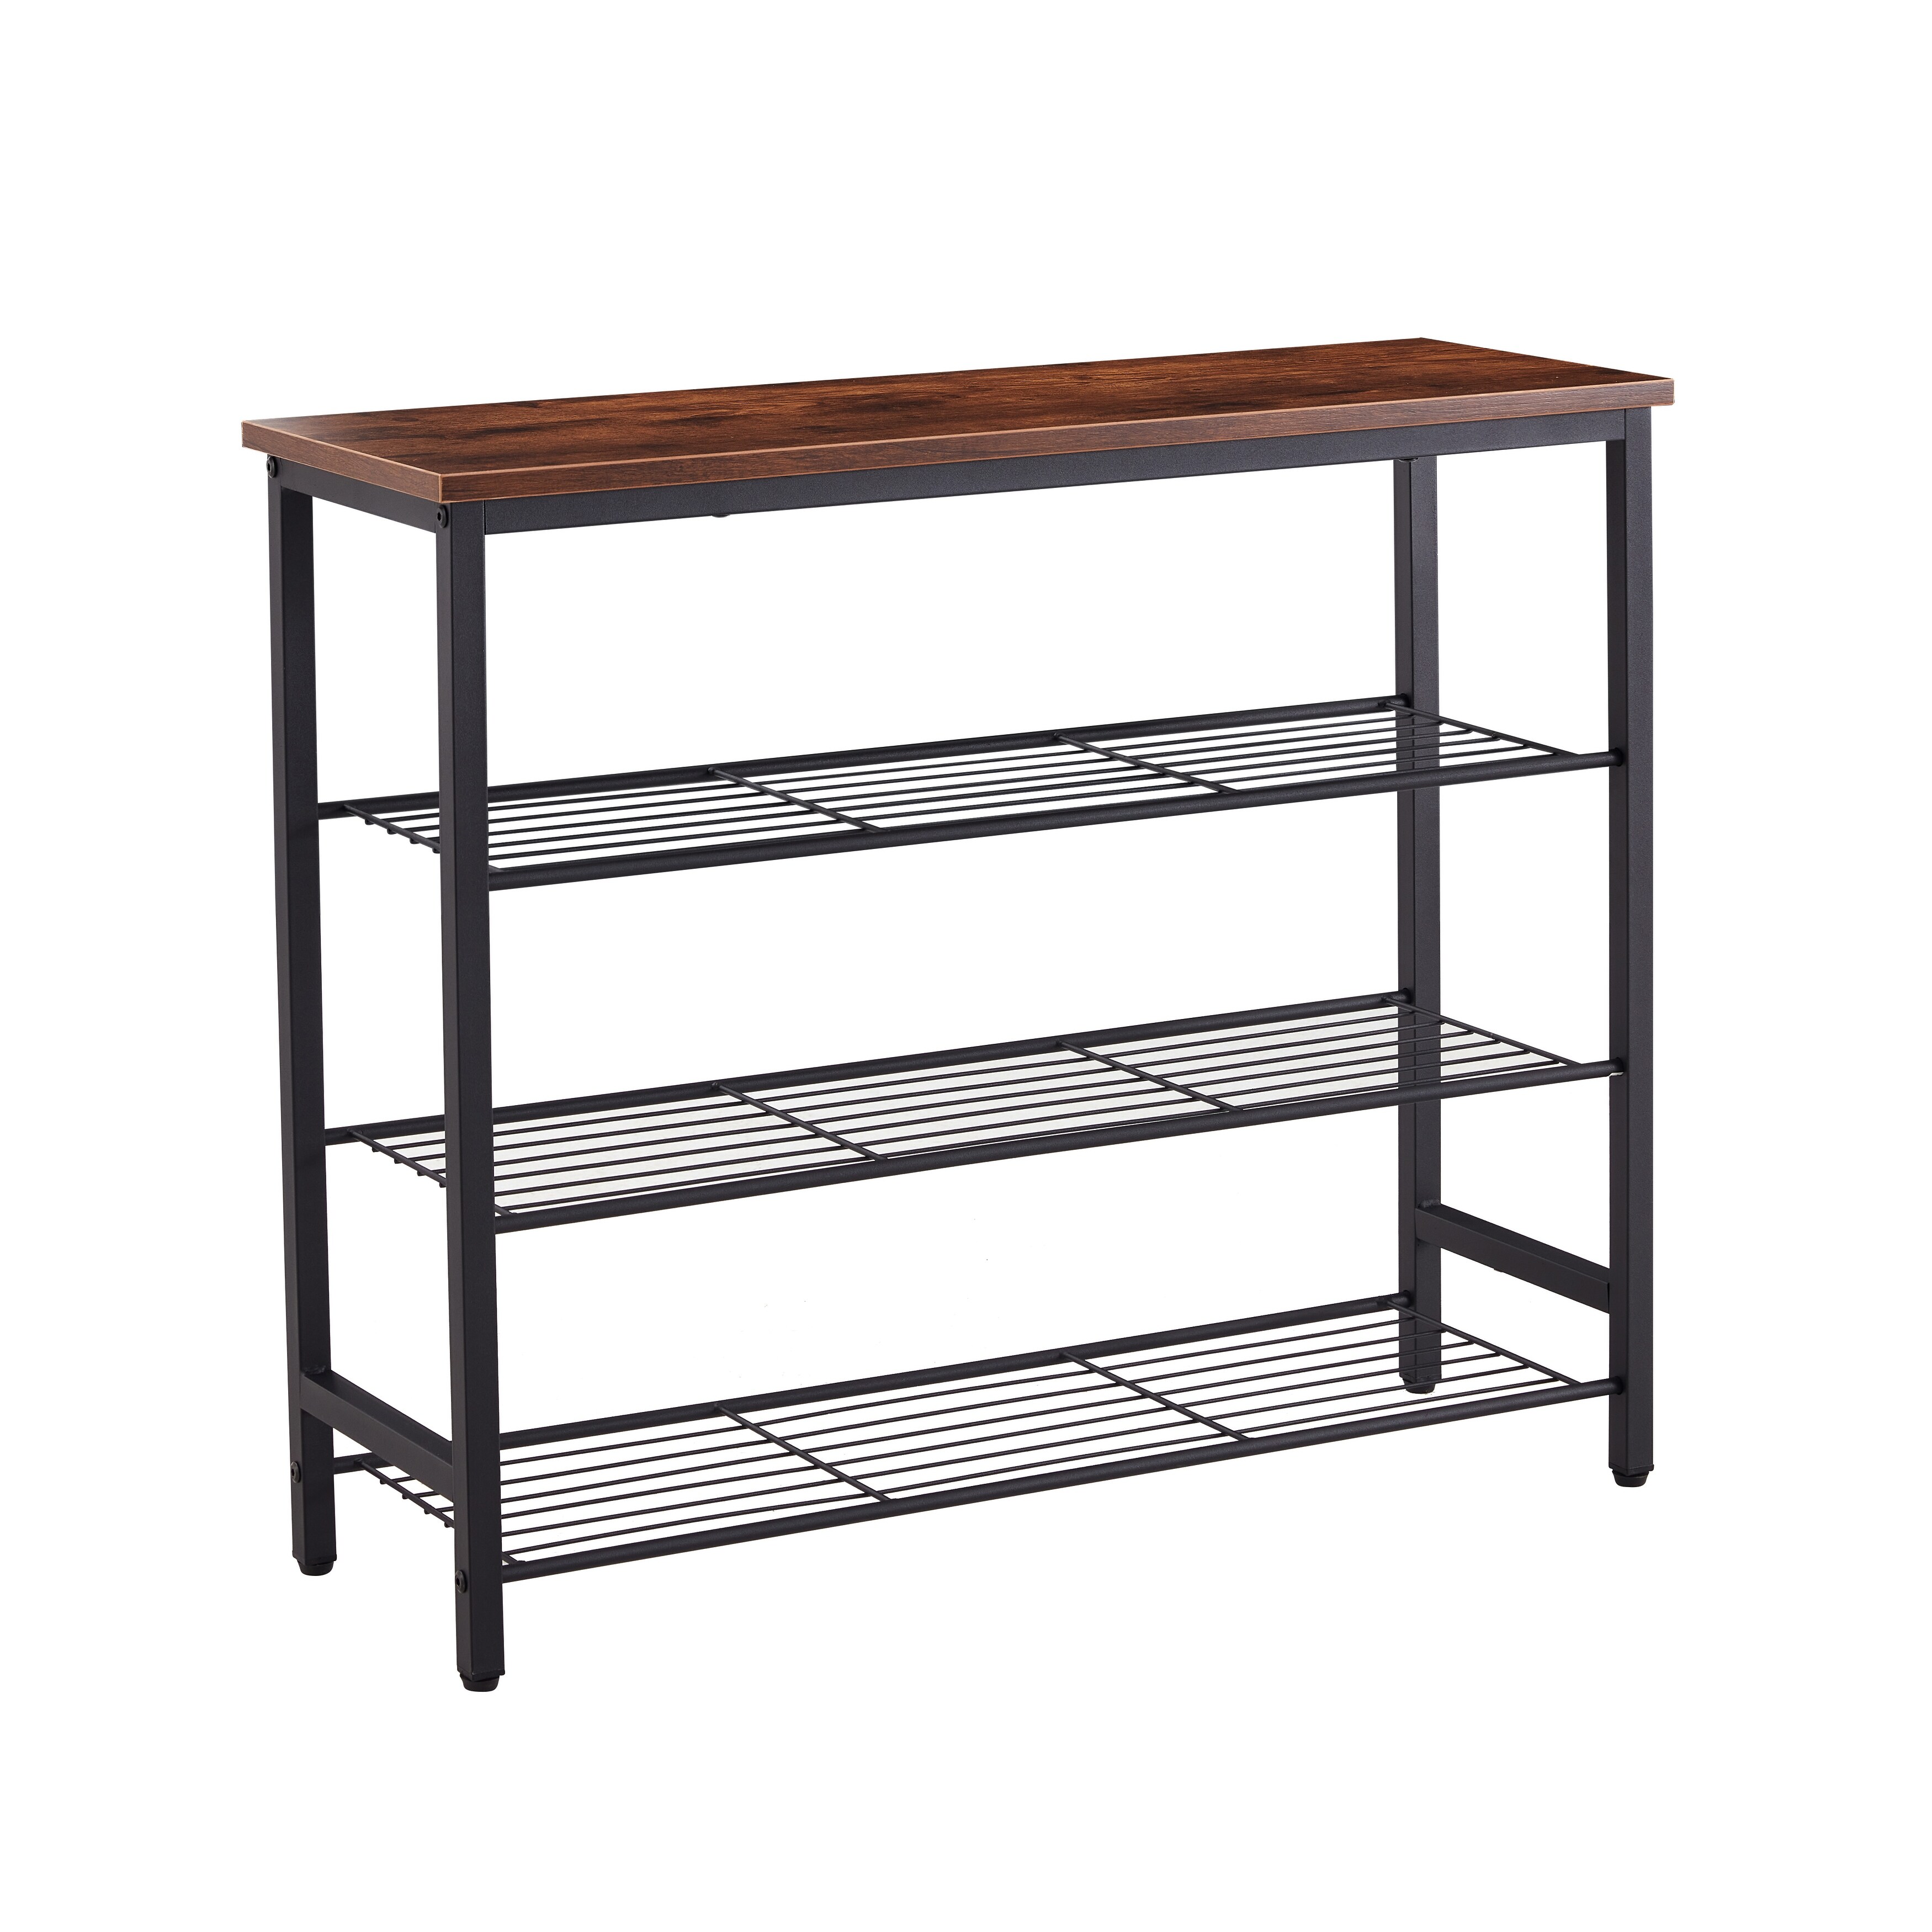 https://ak1.ostkcdn.com/images/products/is/images/direct/1bba082a092f02608079821e1f9287d3e93703e0/DN-4-Tier-Metal-Shoe-Rack%2C-Modern-Multifunctional-Shoe-Storage-Shelf-with-MDF-Top-Board%2C-1-pc-per-carton.jpg